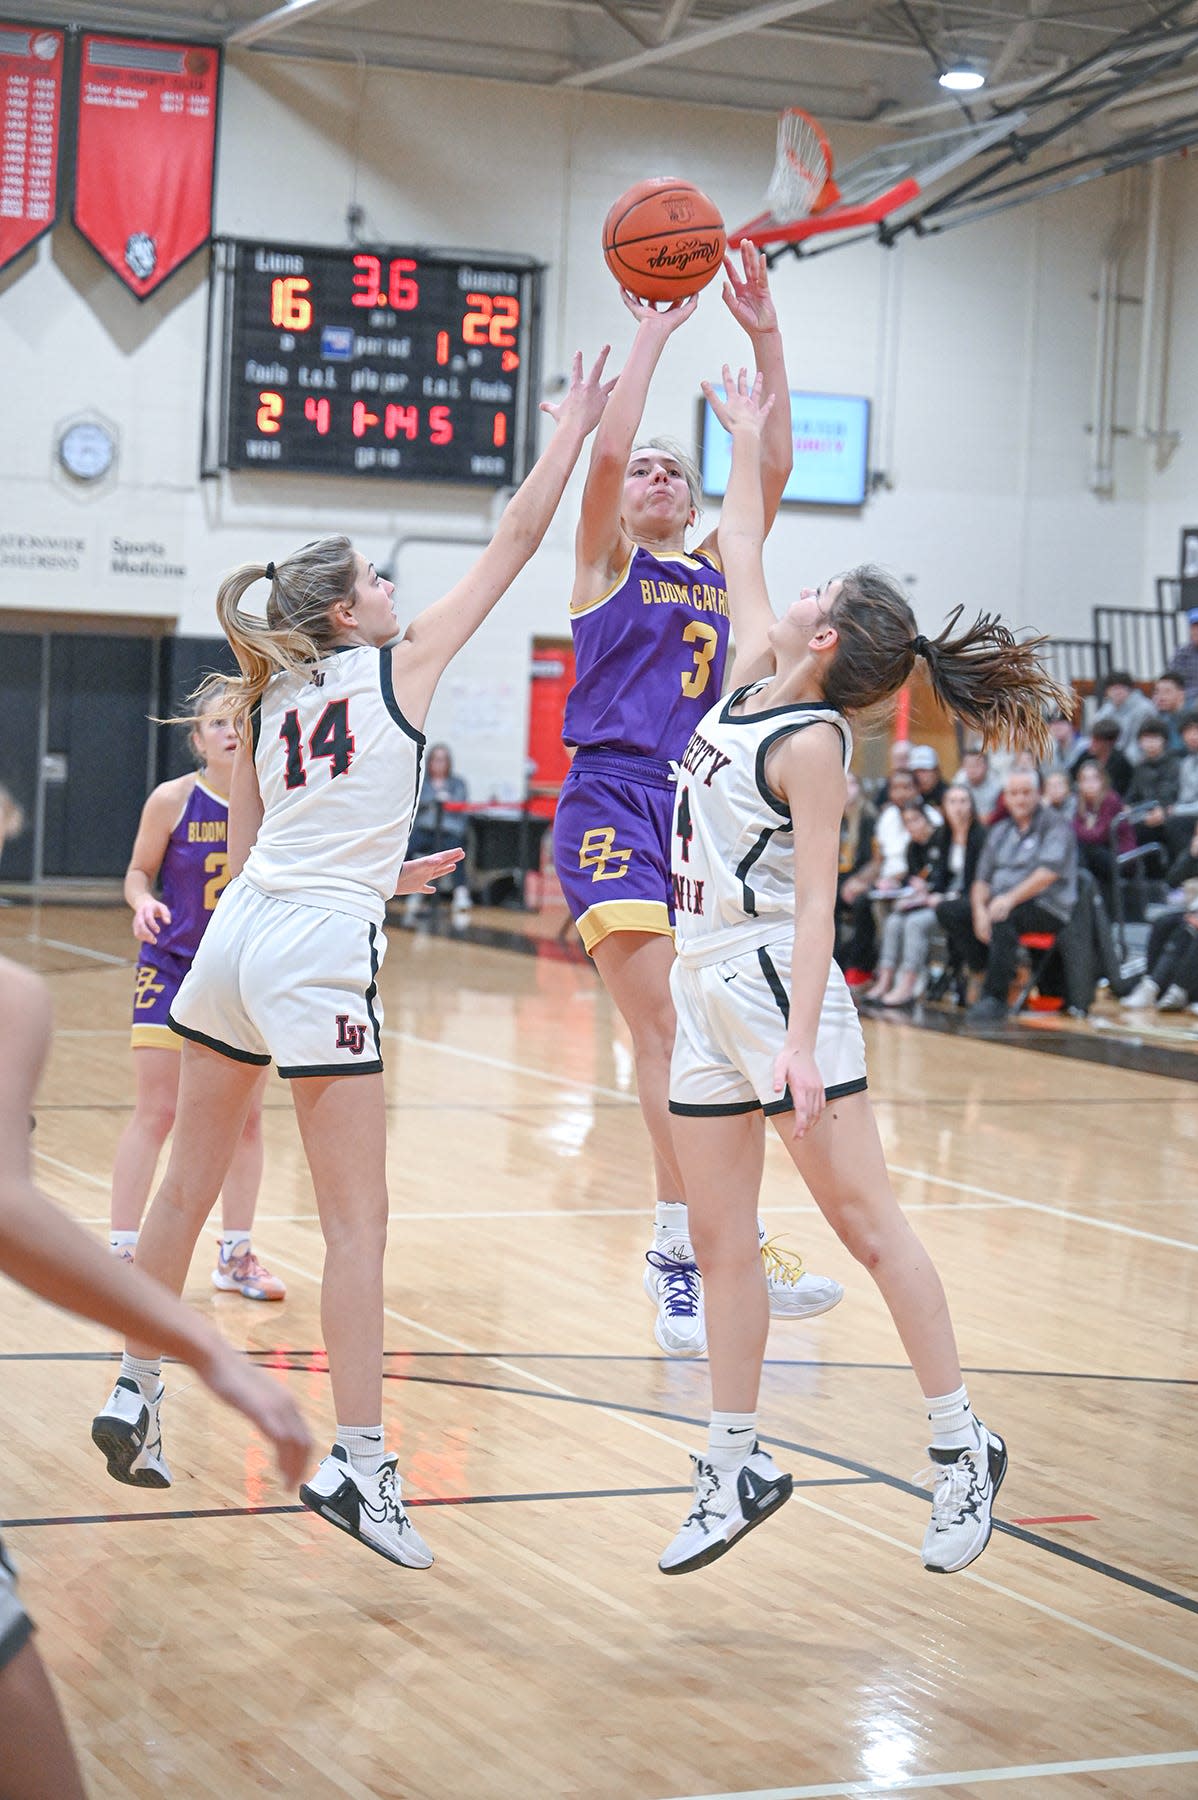 Liberty Union's Ella Brown (14) and Payton Hochradel (4) attempt to block the jump shot of Bloom Carroll's Emily Bratton Monday evening in the Del Barr Gymnasium. The visiting Bulldogs defeated the Lions 65-47. -Jamie Potts/Lancaster Eagle Gazette